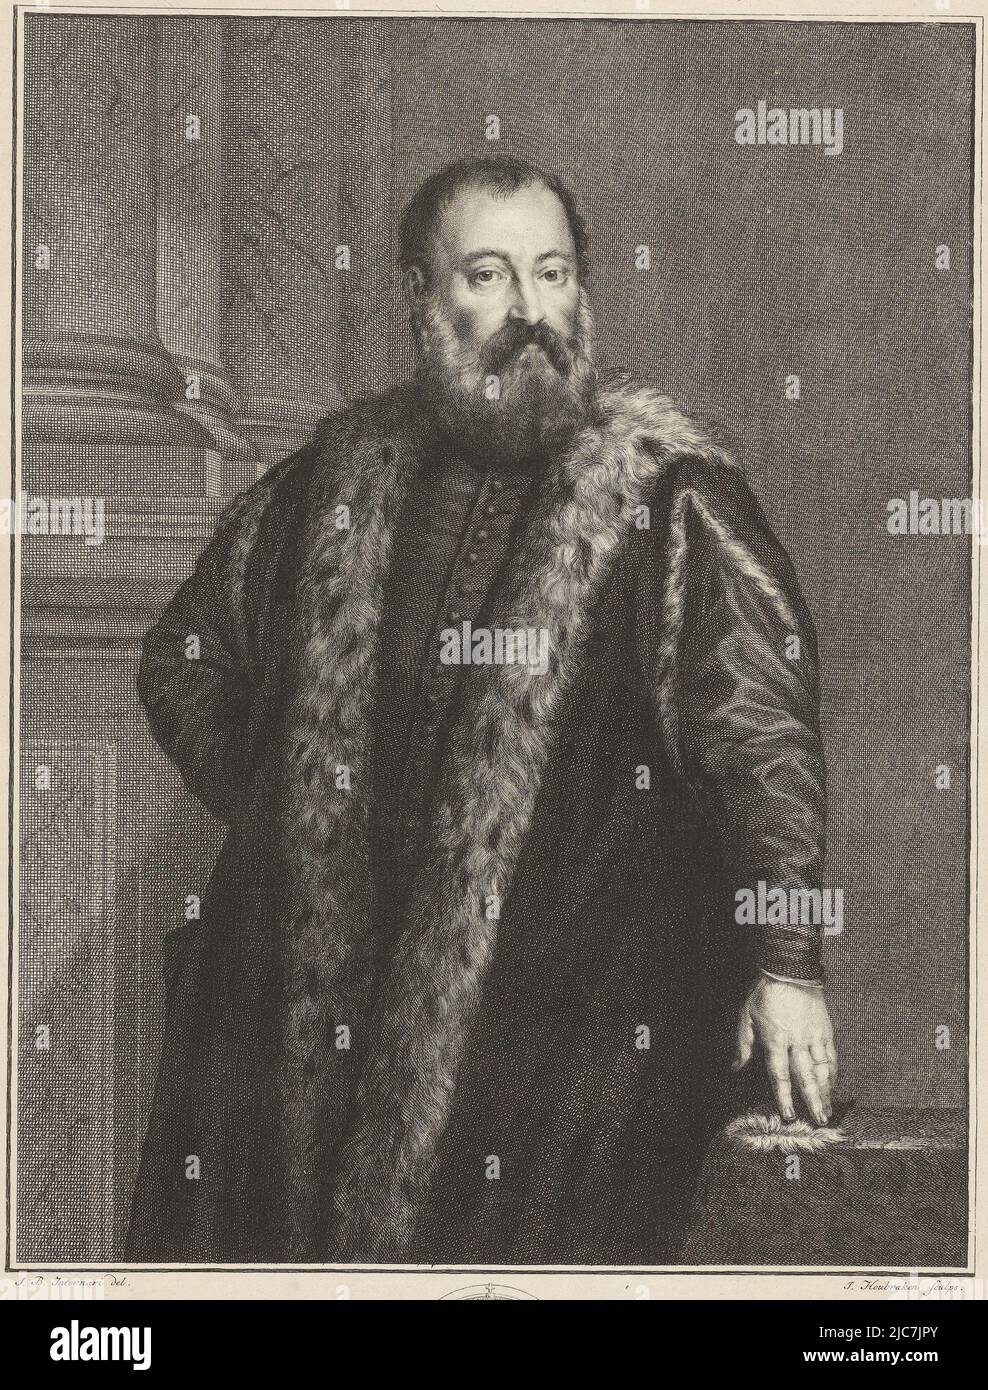 Kneepiece of Alessandro Contarini, dressed in a fur coat, standing in an interior. One hand is on his hip, with the other he rests his fingertips on a table beside him. Below the portrait a coat of arms. On the left four lines in Italian, on the right four lines in French. Bottom right: no. 10. Portrait of Alessandro Contarini Quadro di Paolo Caliari Veronese , print maker: Jacob Houbraken, (mentioned on object), after: Paolo Veronese, (mentioned on object), intermediary draughtsman: Giovanni Battista Internari, (mentioned on object), Amsterdam, 1708 - 1780, paper, engraving, etching, h 354 mm Stock Photo